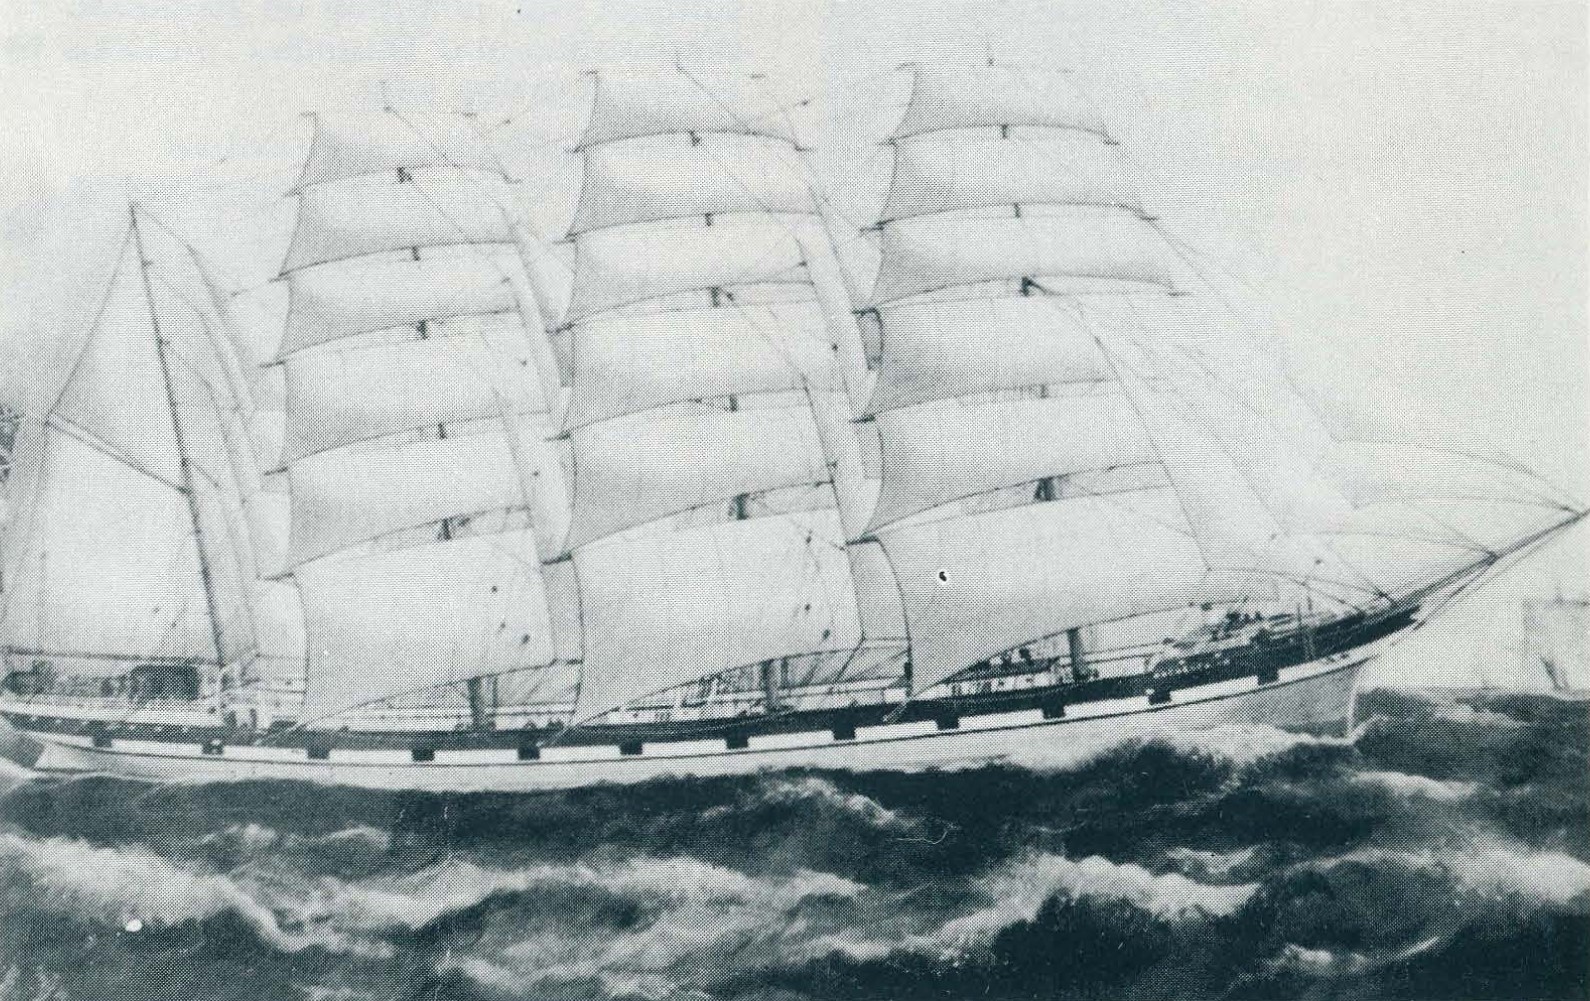 Auchencairn built at Ritsons in Maryport 1891